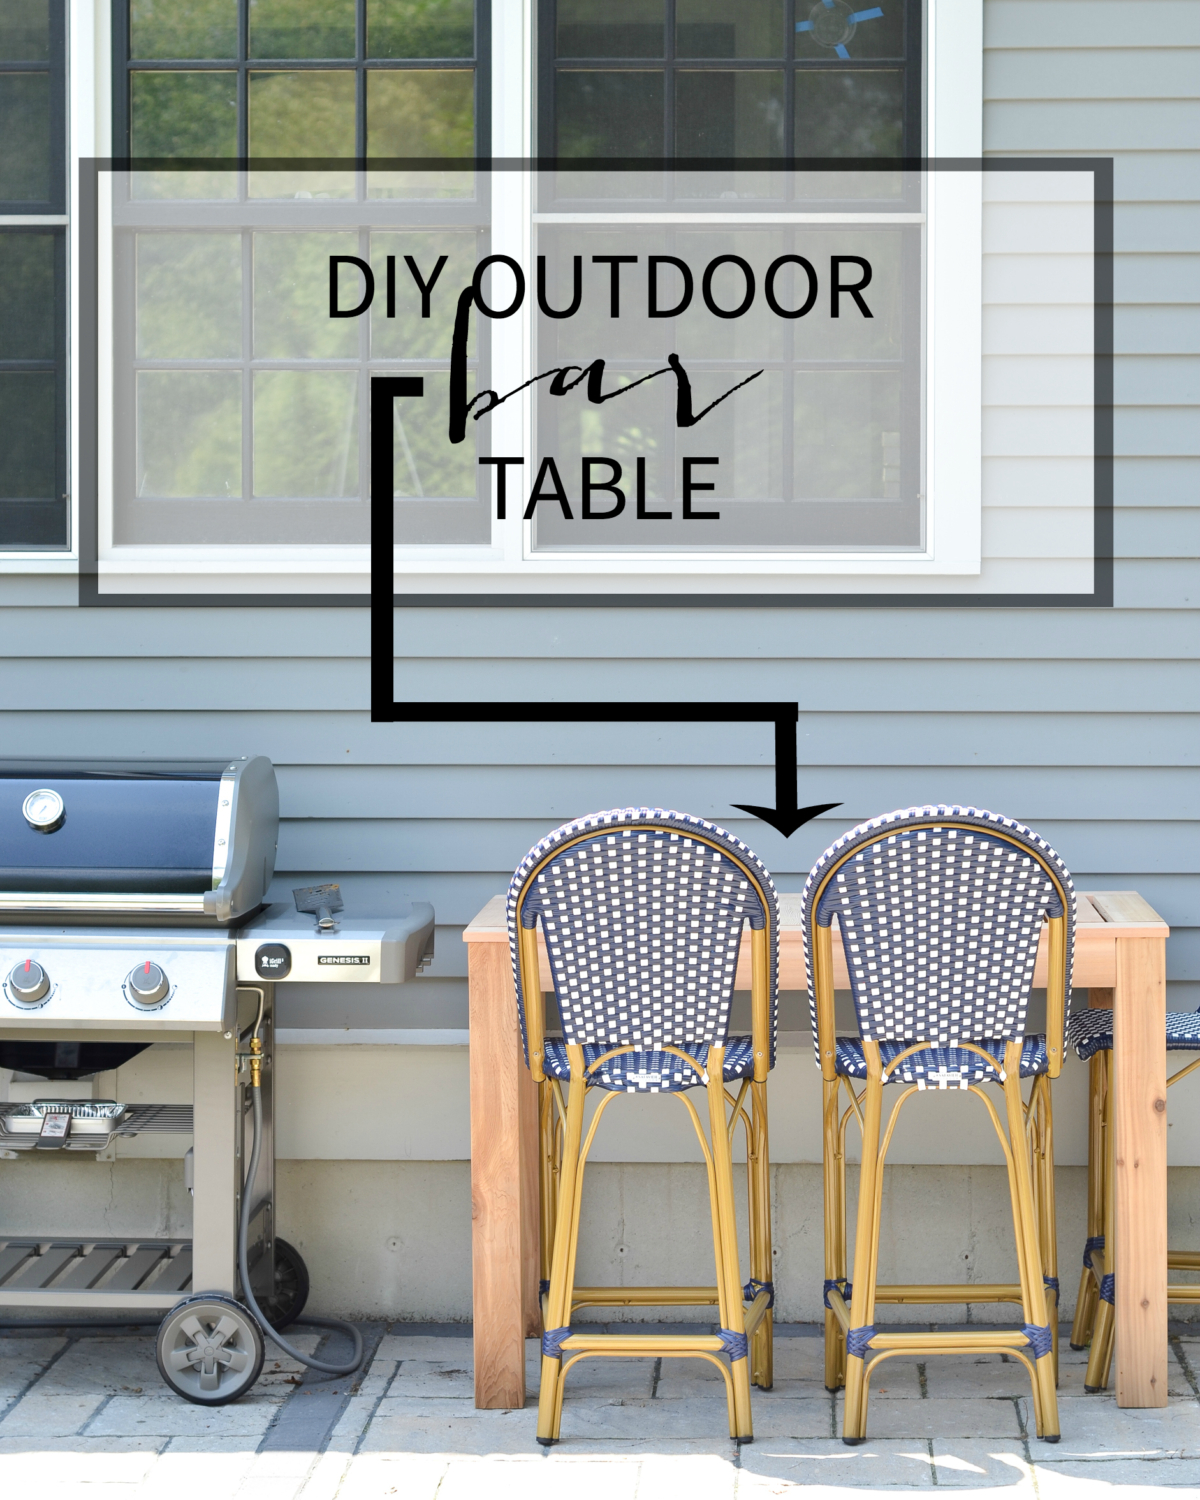 FREE plans for building this DIY outdoor bar table - super easy and perfect for next to a grill, for extra seating, for serving space, or as a drinks station!